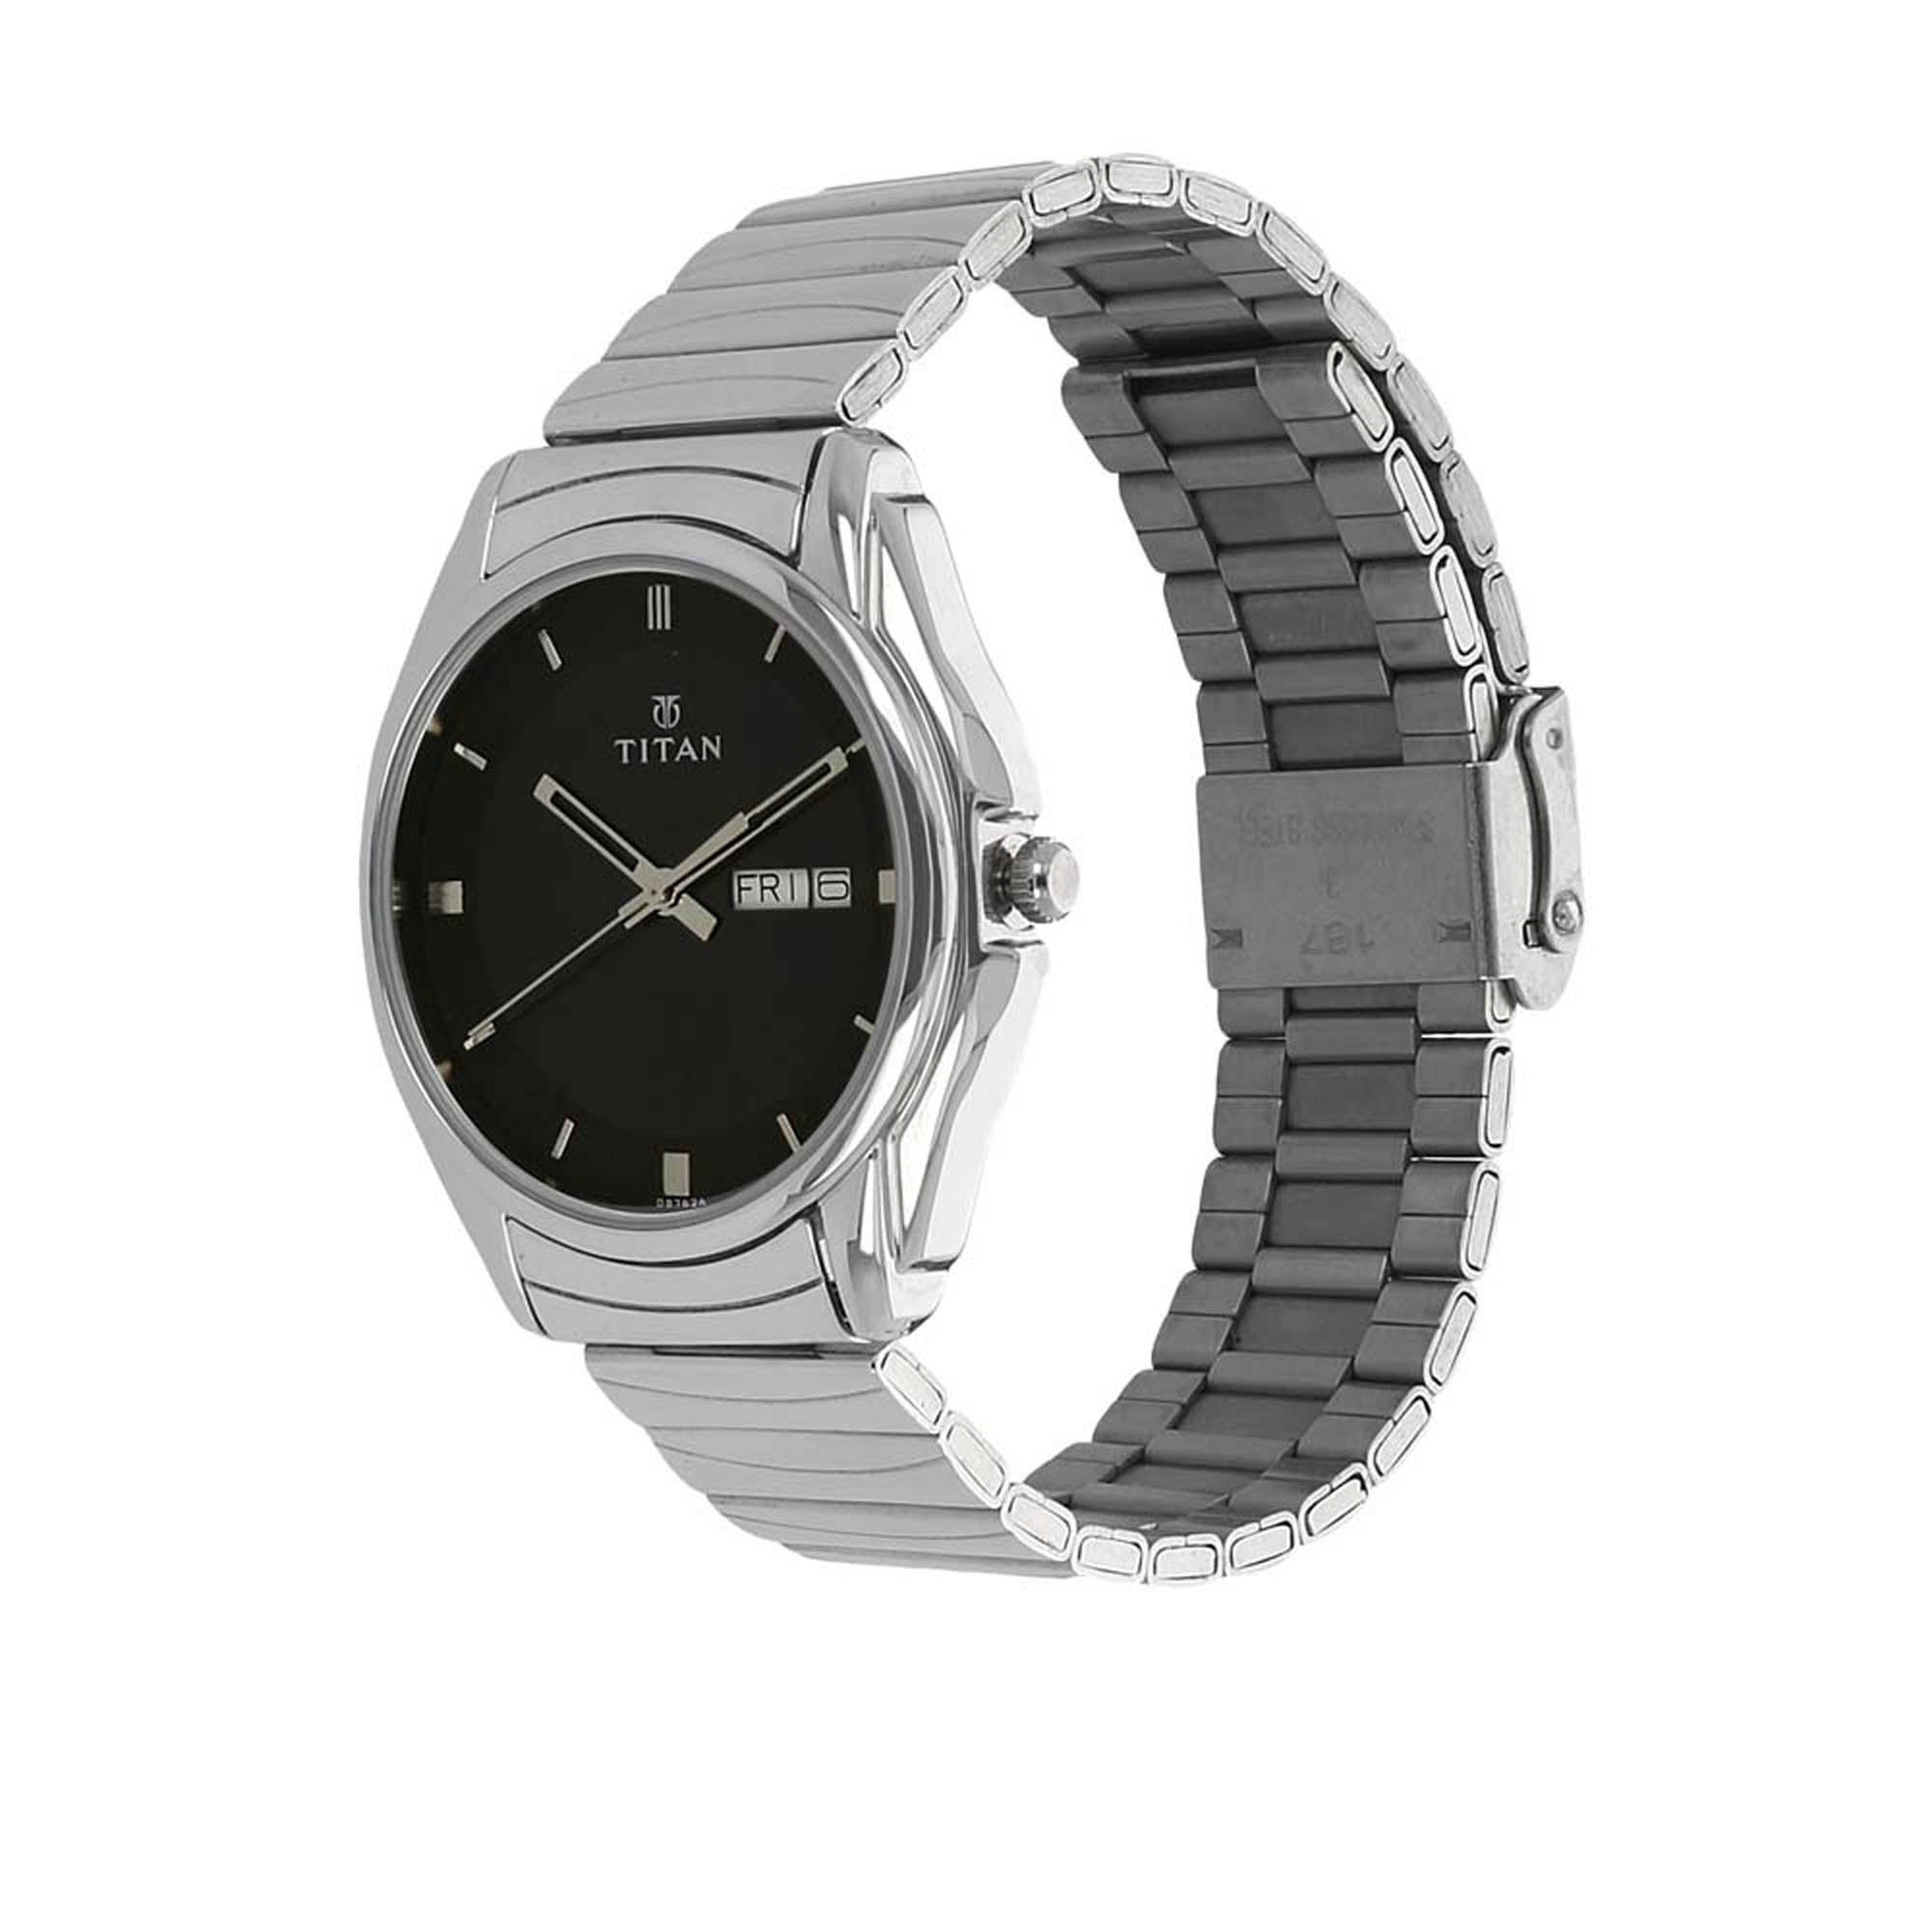 Titan Quartz Analog with Day and Date Black Dial Stainless Steel Strap Watch for Men